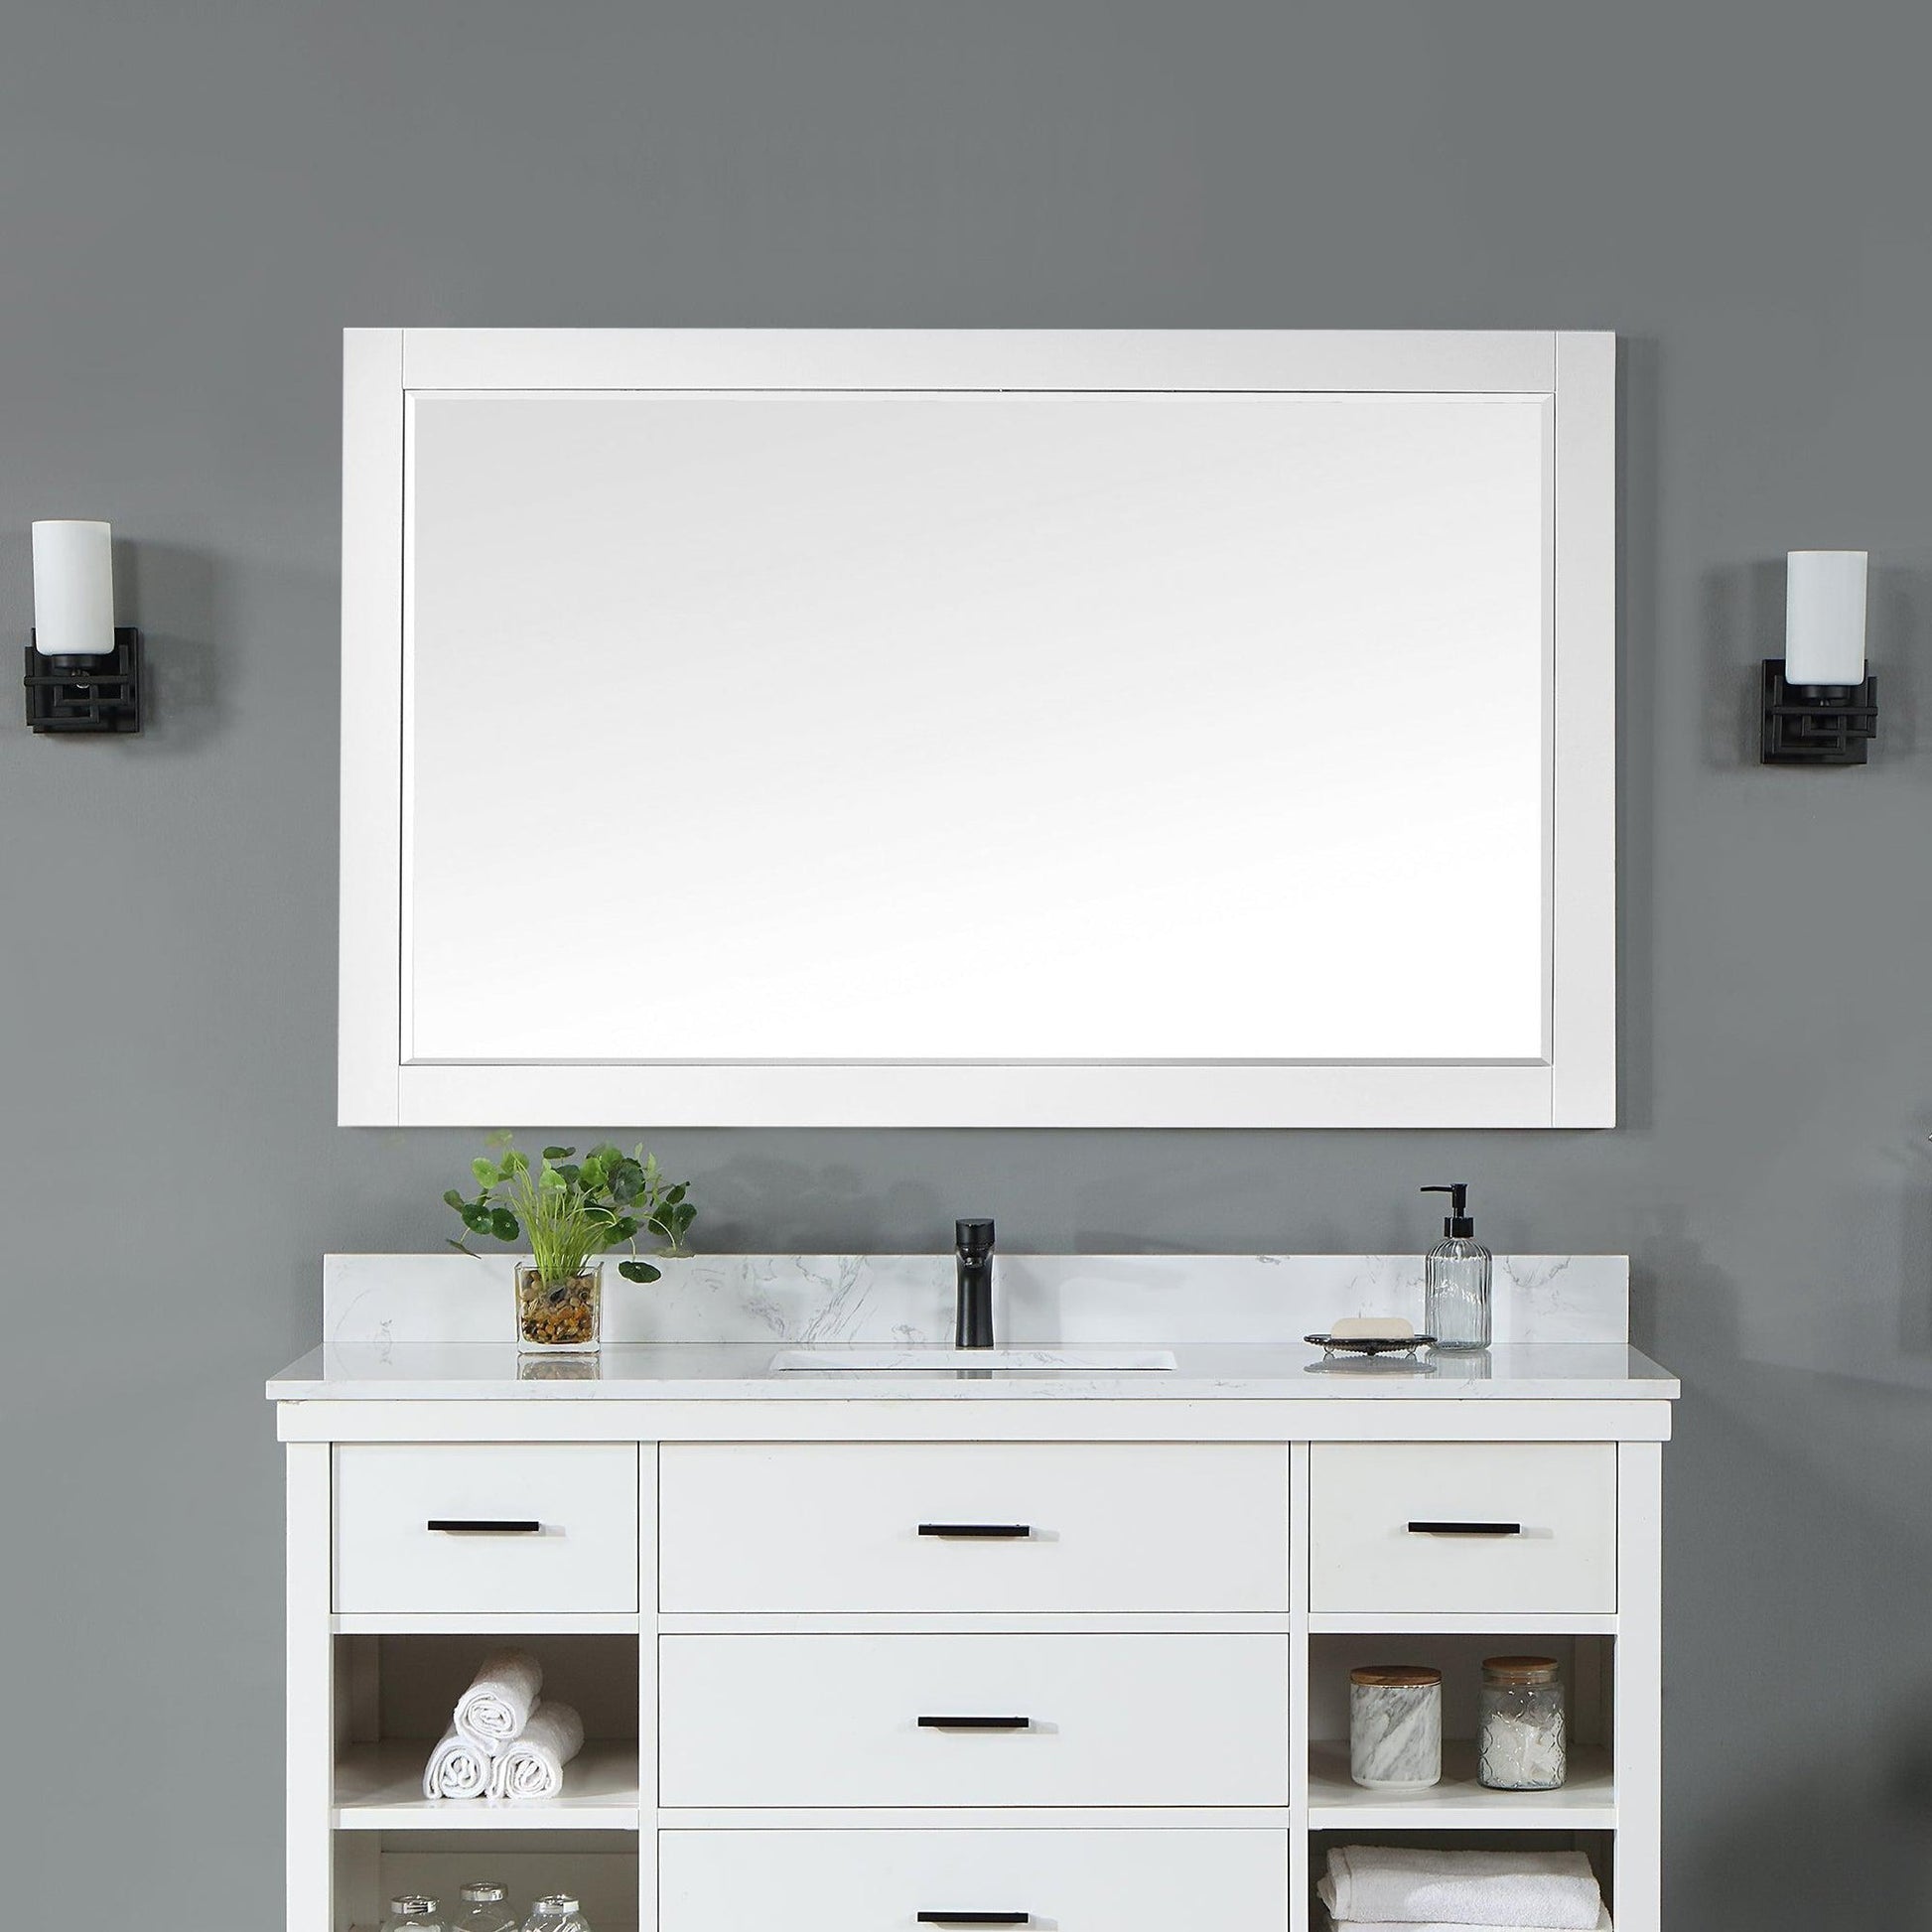 Altair Maribella 57" x 36" Rectangle White Wood Framed Wall-Mounted Mirror